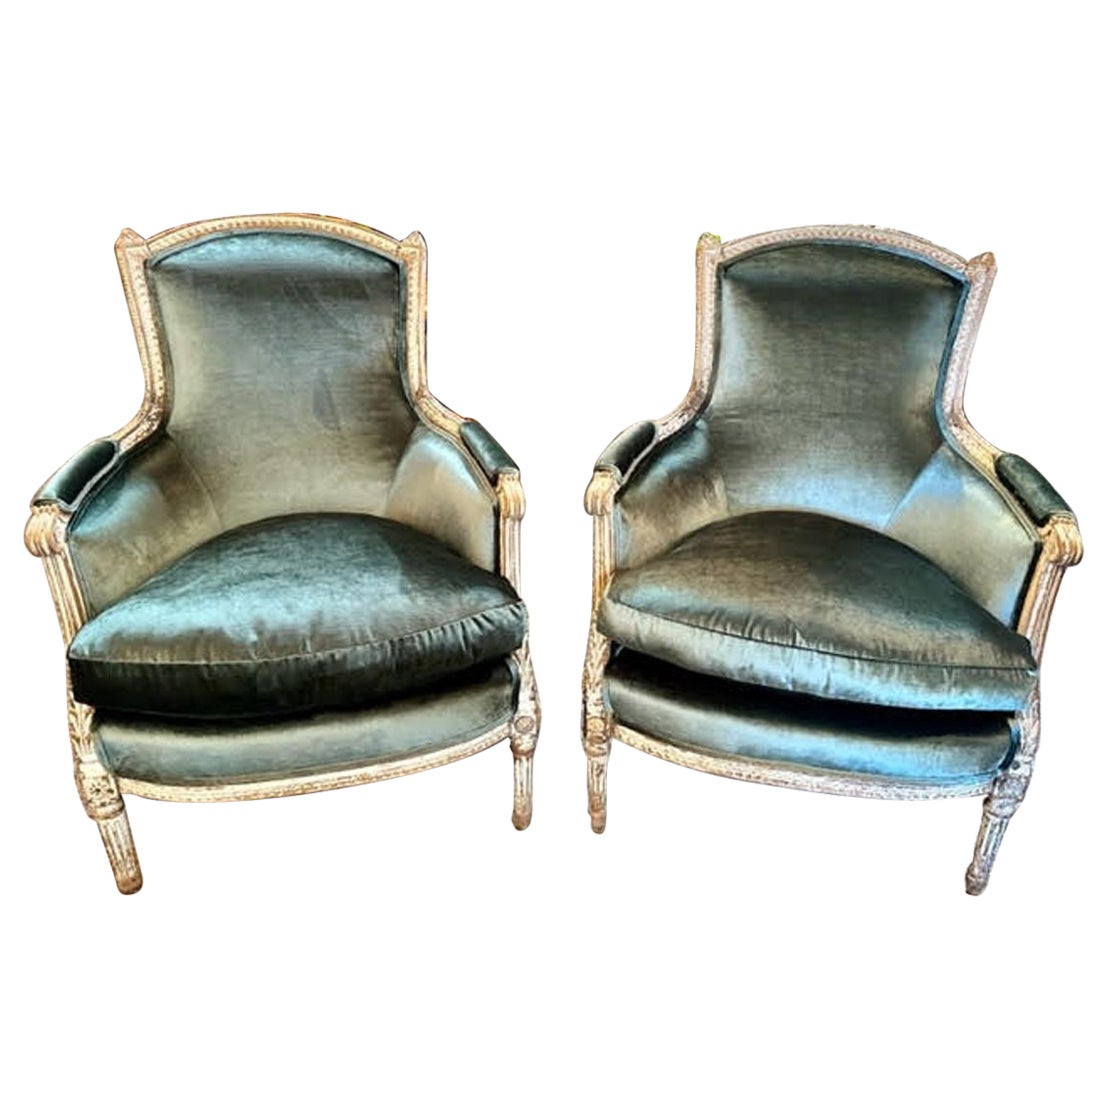 Pair of 18th Century Louis XVI Chairs with Velvet Upholstery